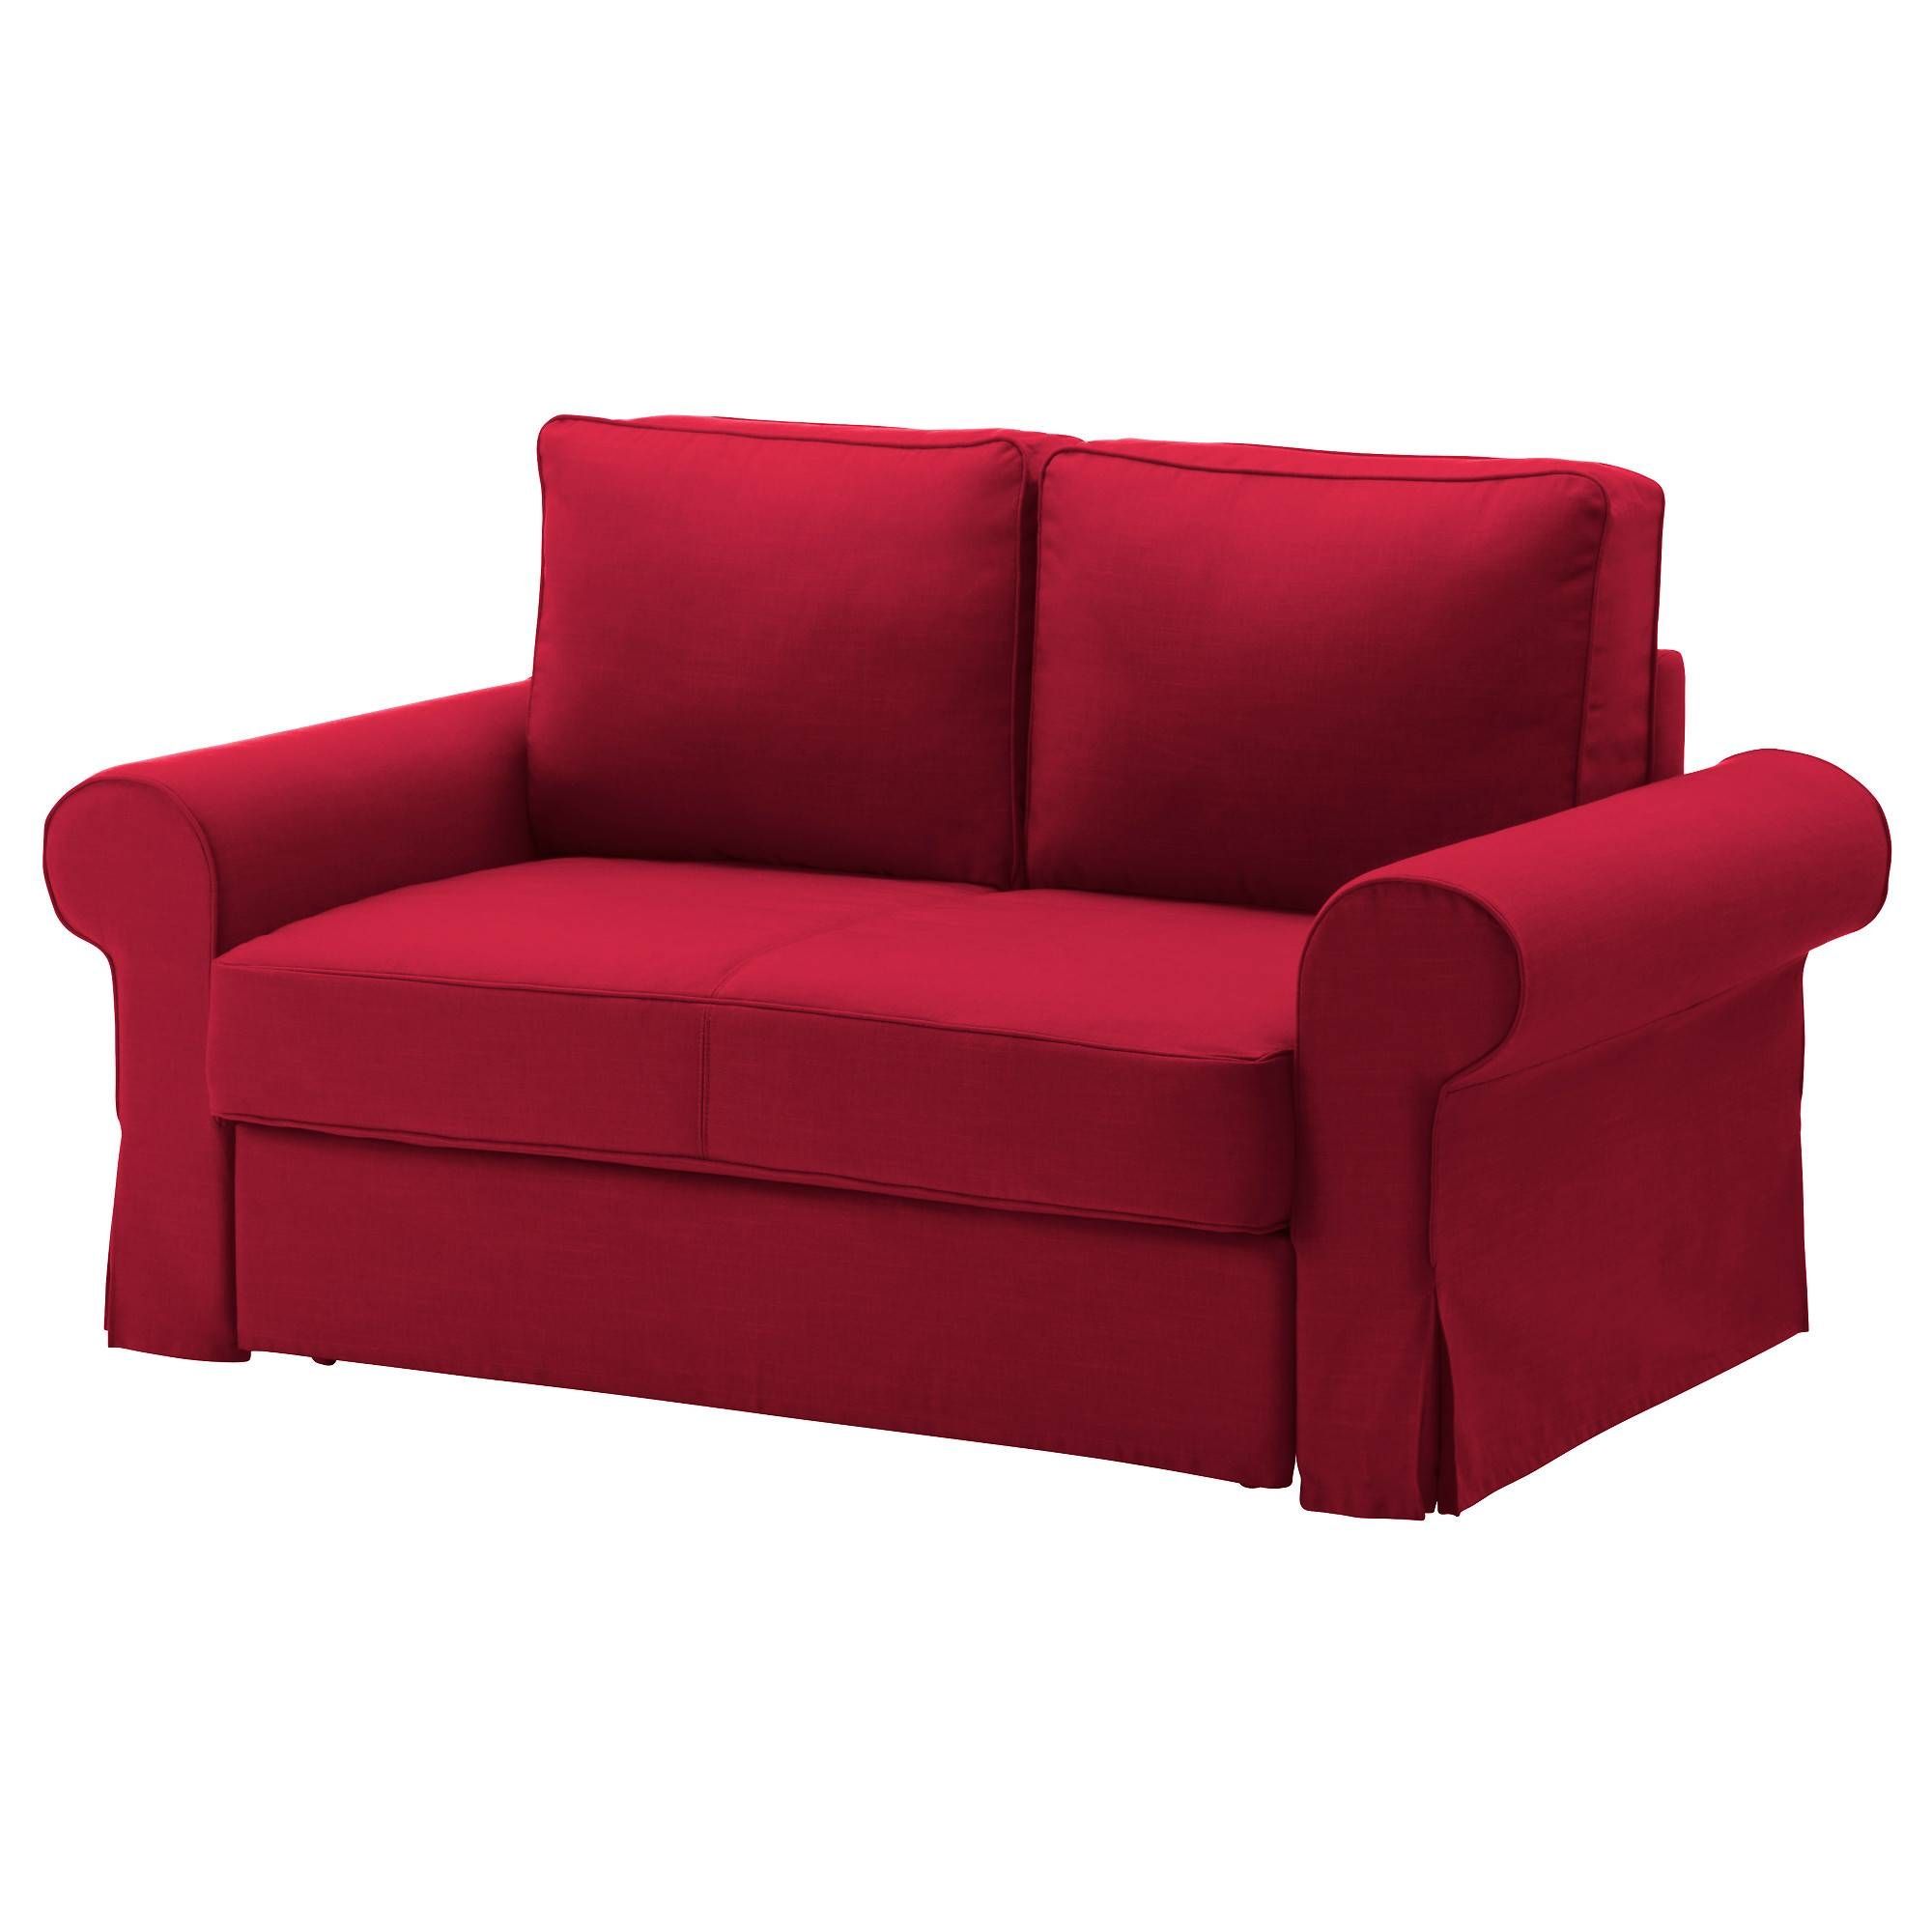 Backabro Two Seat Sofa Bed Nordvalla Red – Ikea For Red Sofa Beds Ikea (View 8 of 30)